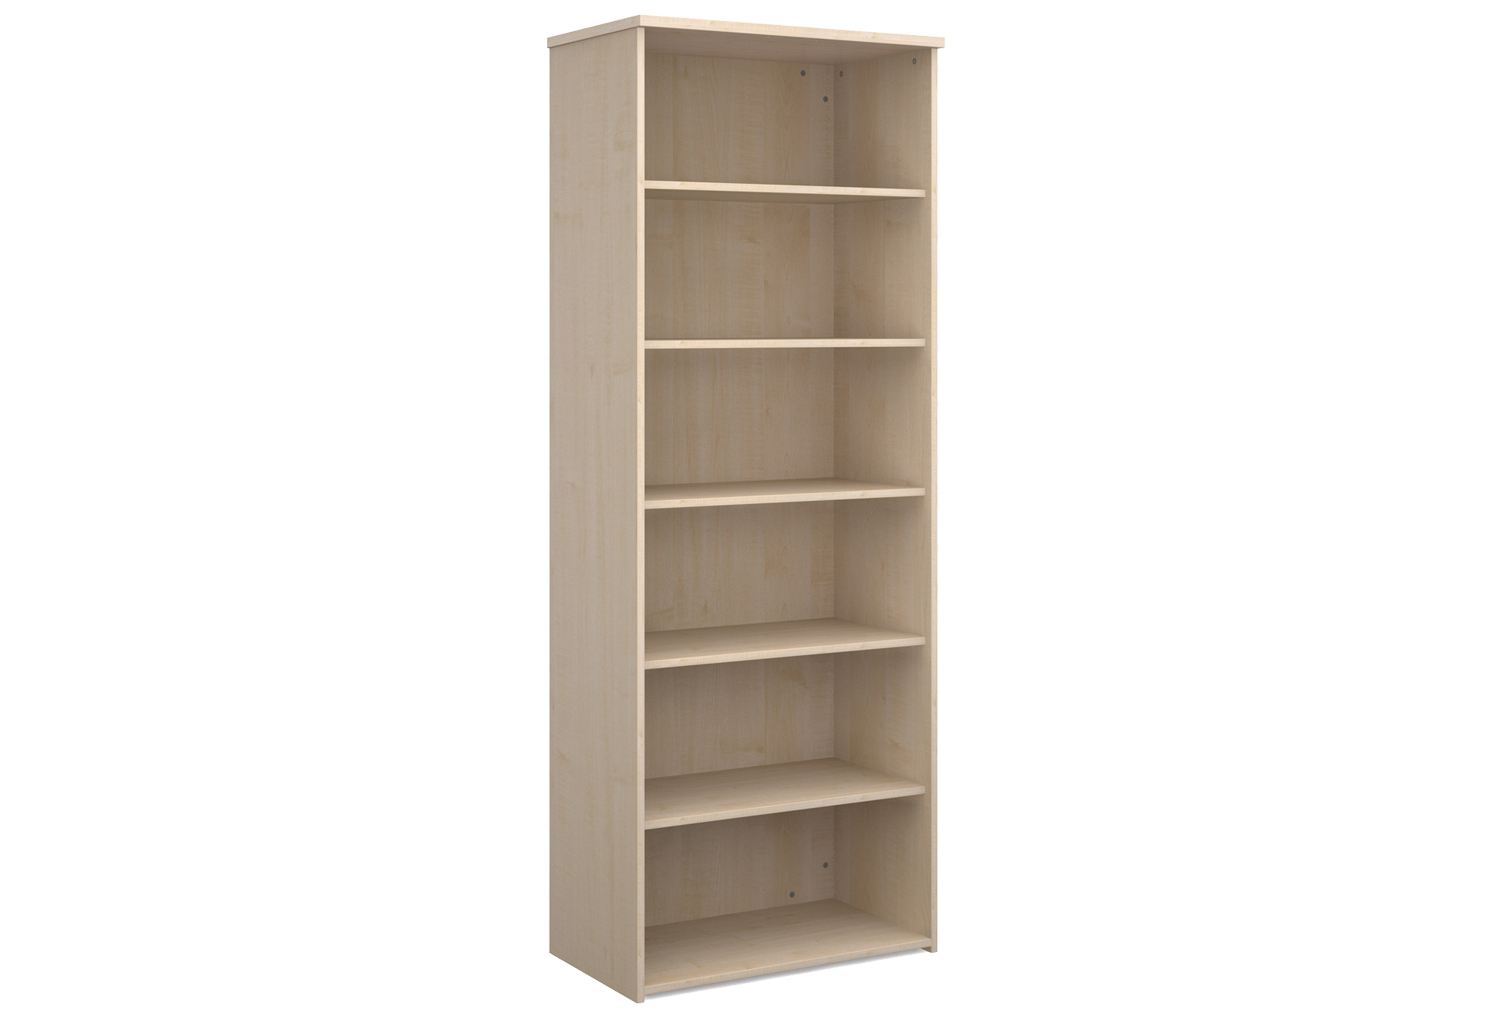 Value Line Office Bookcases, 5 Shelf - 80wx47dx214h (cm), Beech, Express Delivery